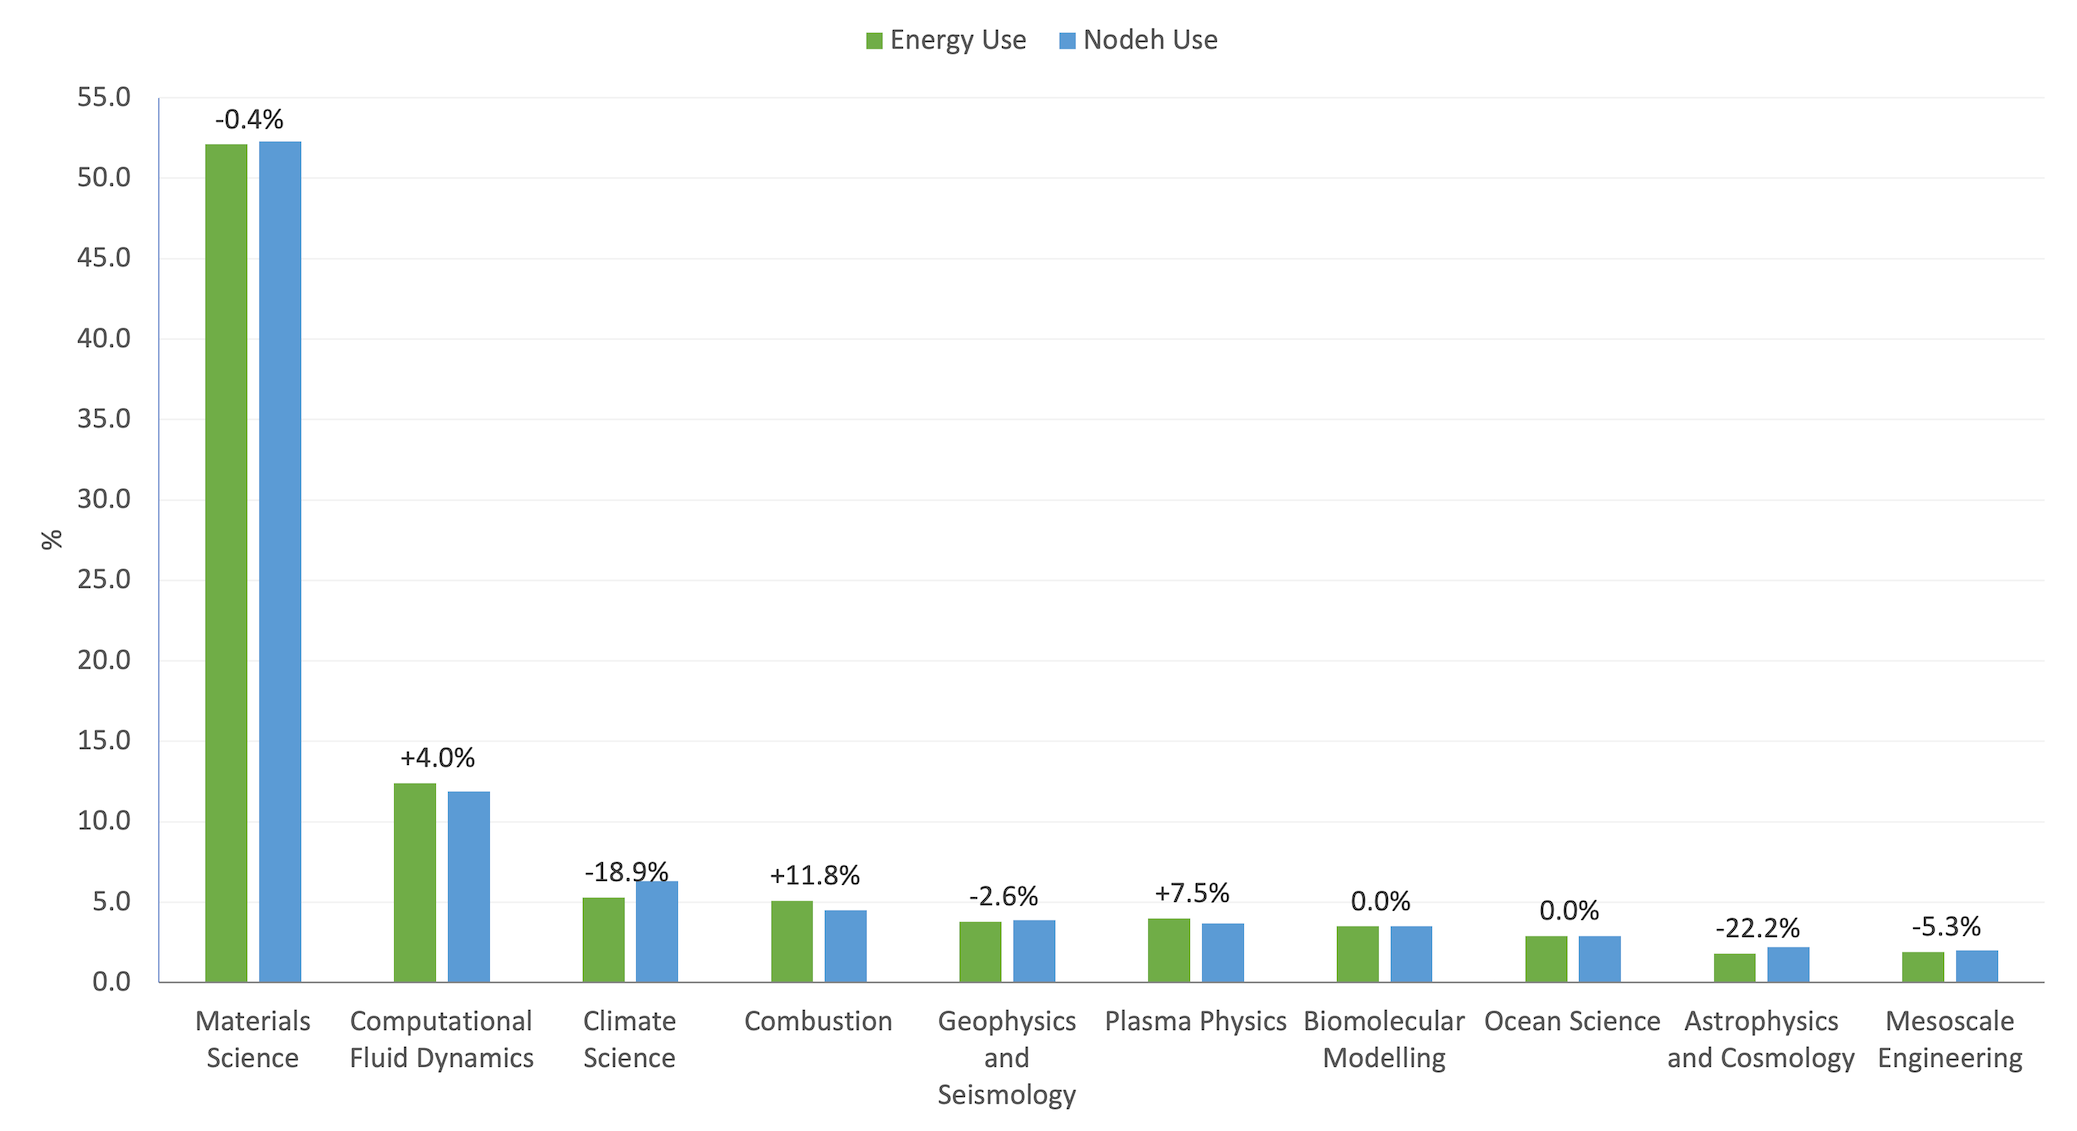 Bar chart comparing energy use and node hour use by research area